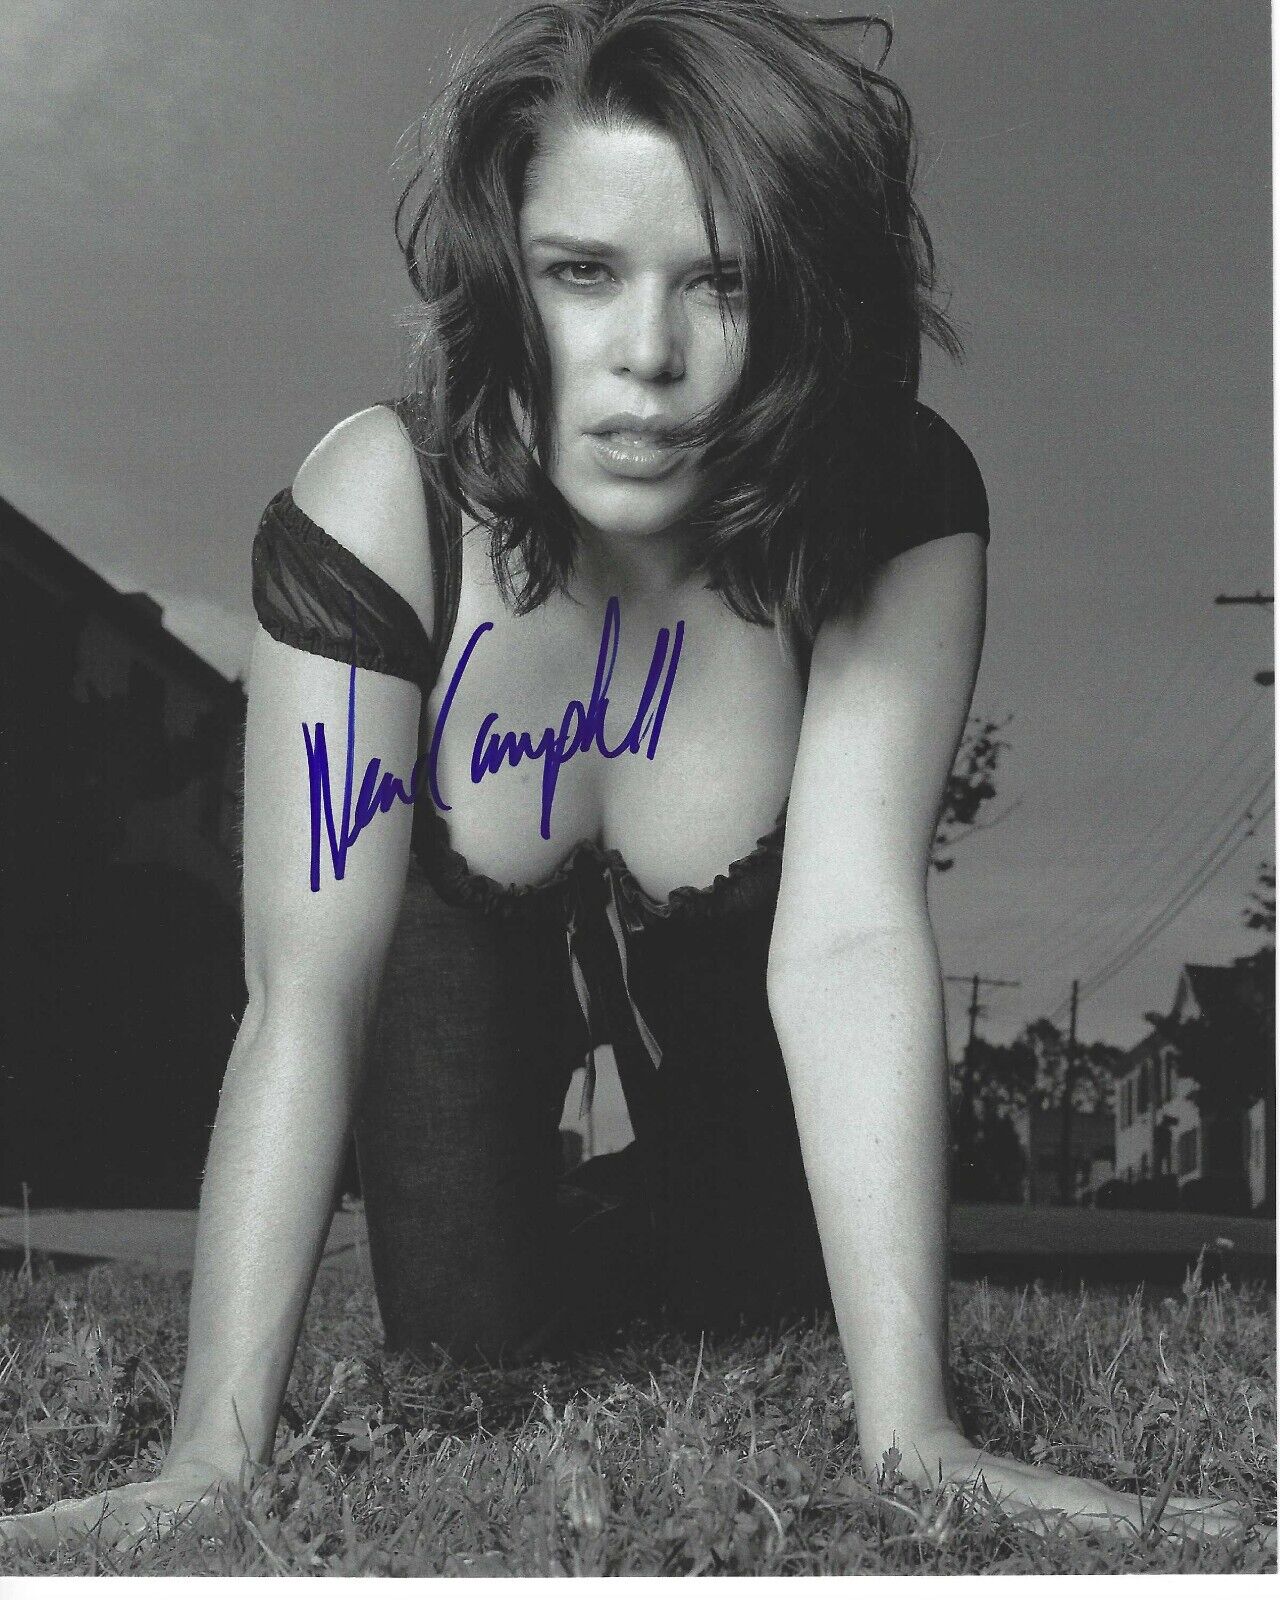 HOT SEXY NEVE CAMPBELL SIGNED 8x10 PHOTO AUTHENTIC AUTOGRAPH COA